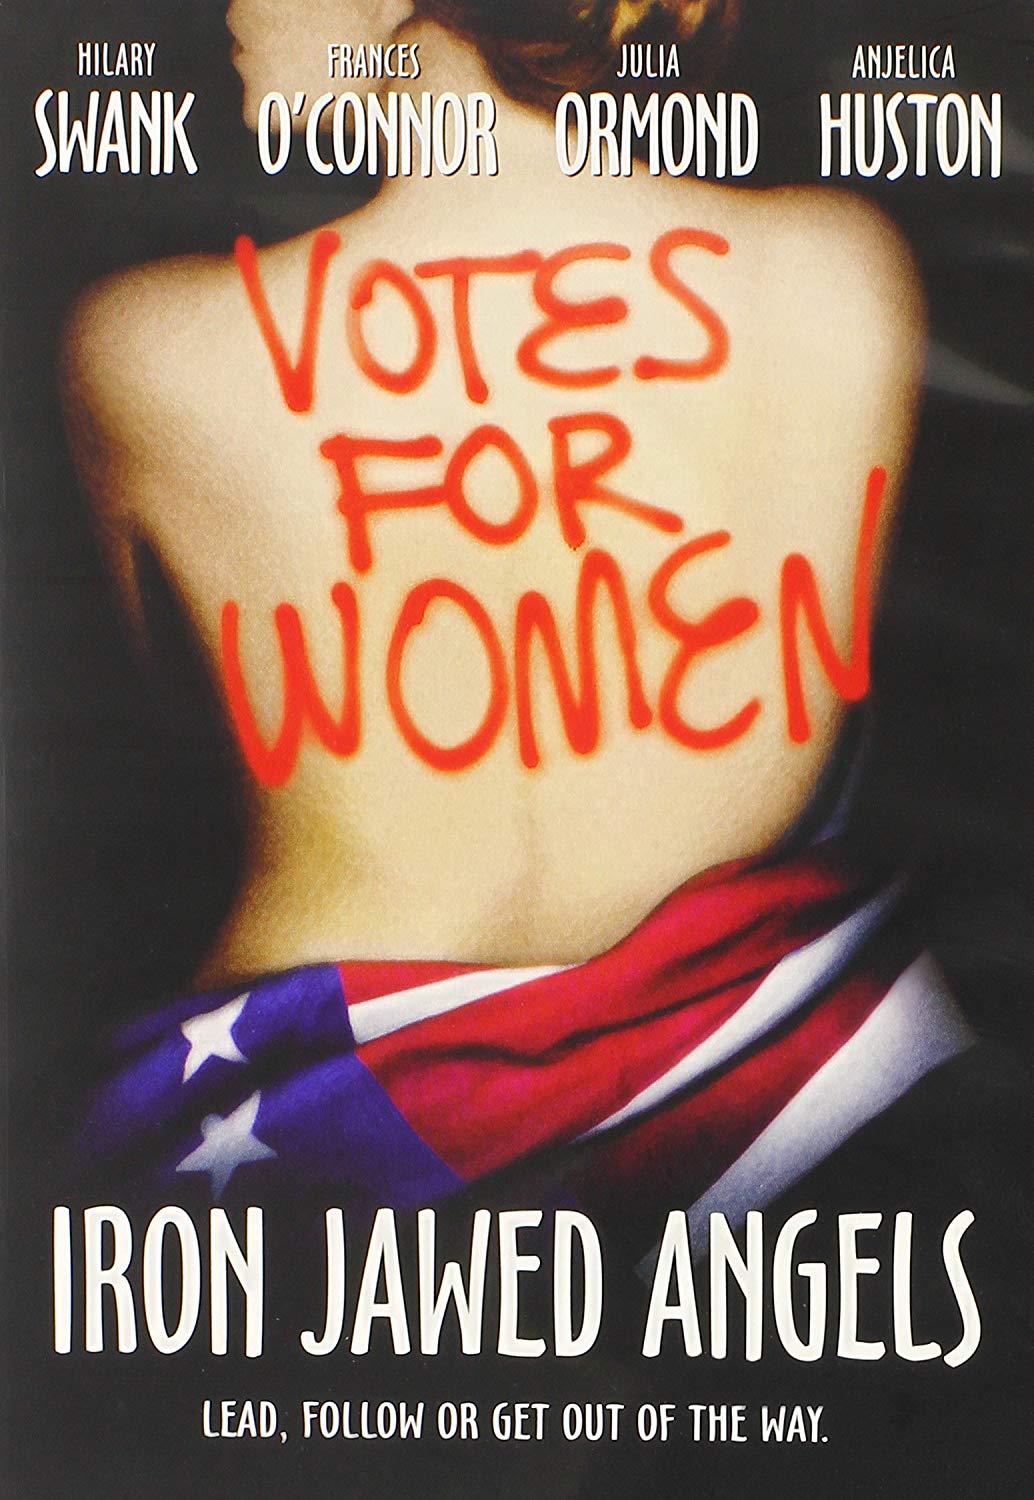 Iron Jawed Angels movie poster